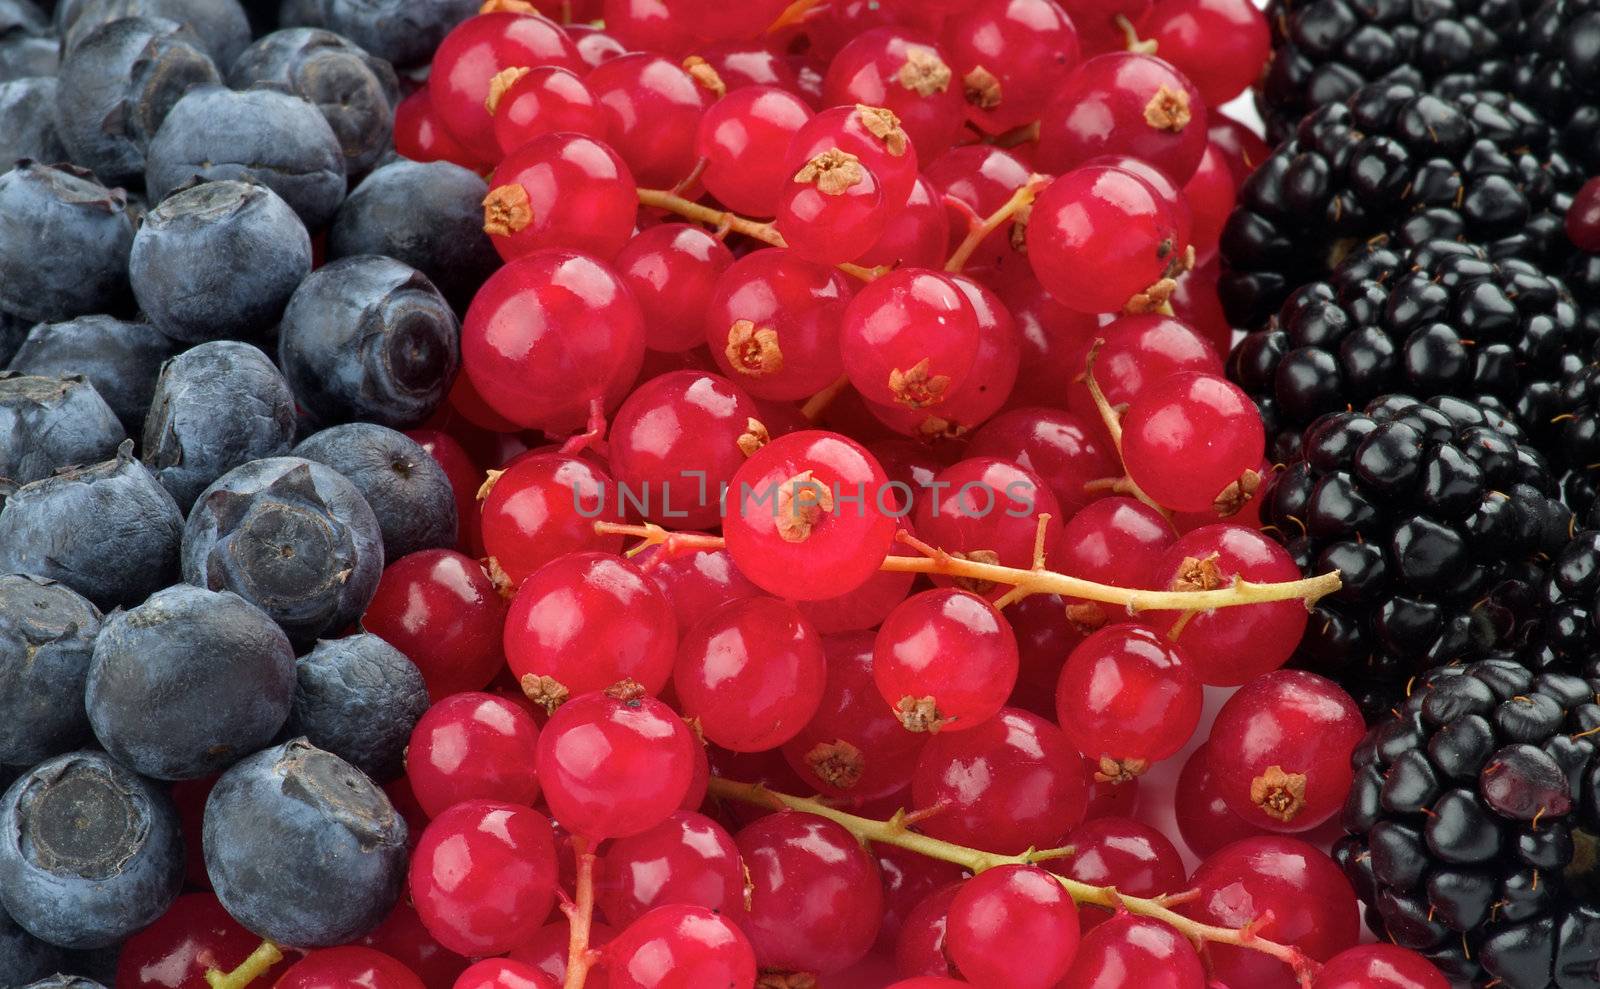 Background of Various Berries with Blackberry, Red Currant and Blueberry in a Row closeup